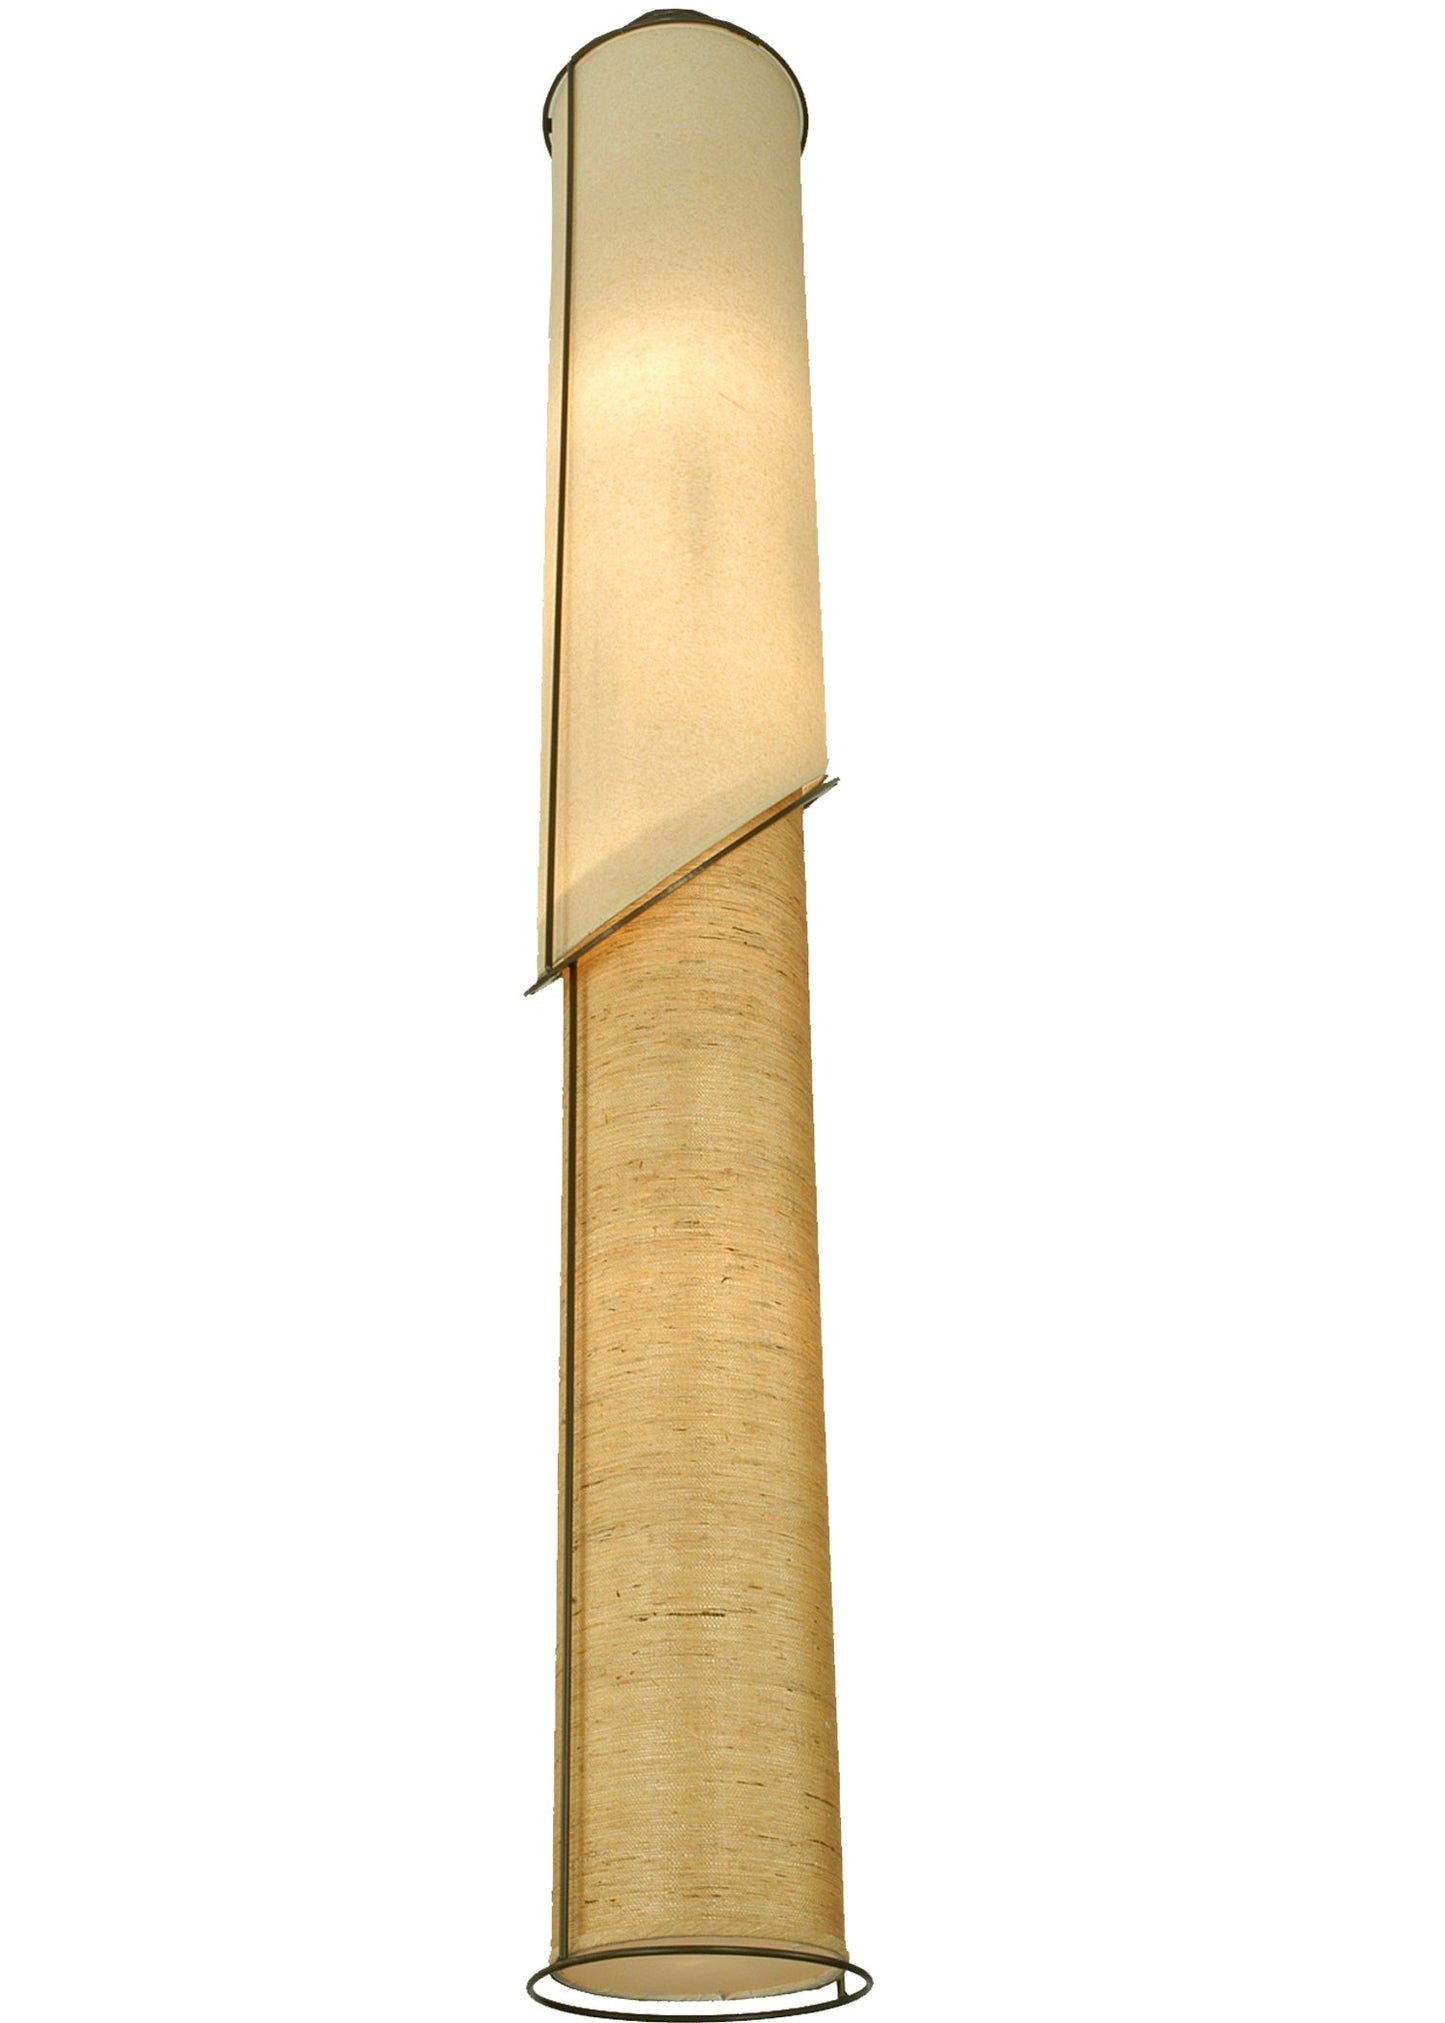 10.5" Cilindro Kiltered Pendant by 2nd Ave Lighting